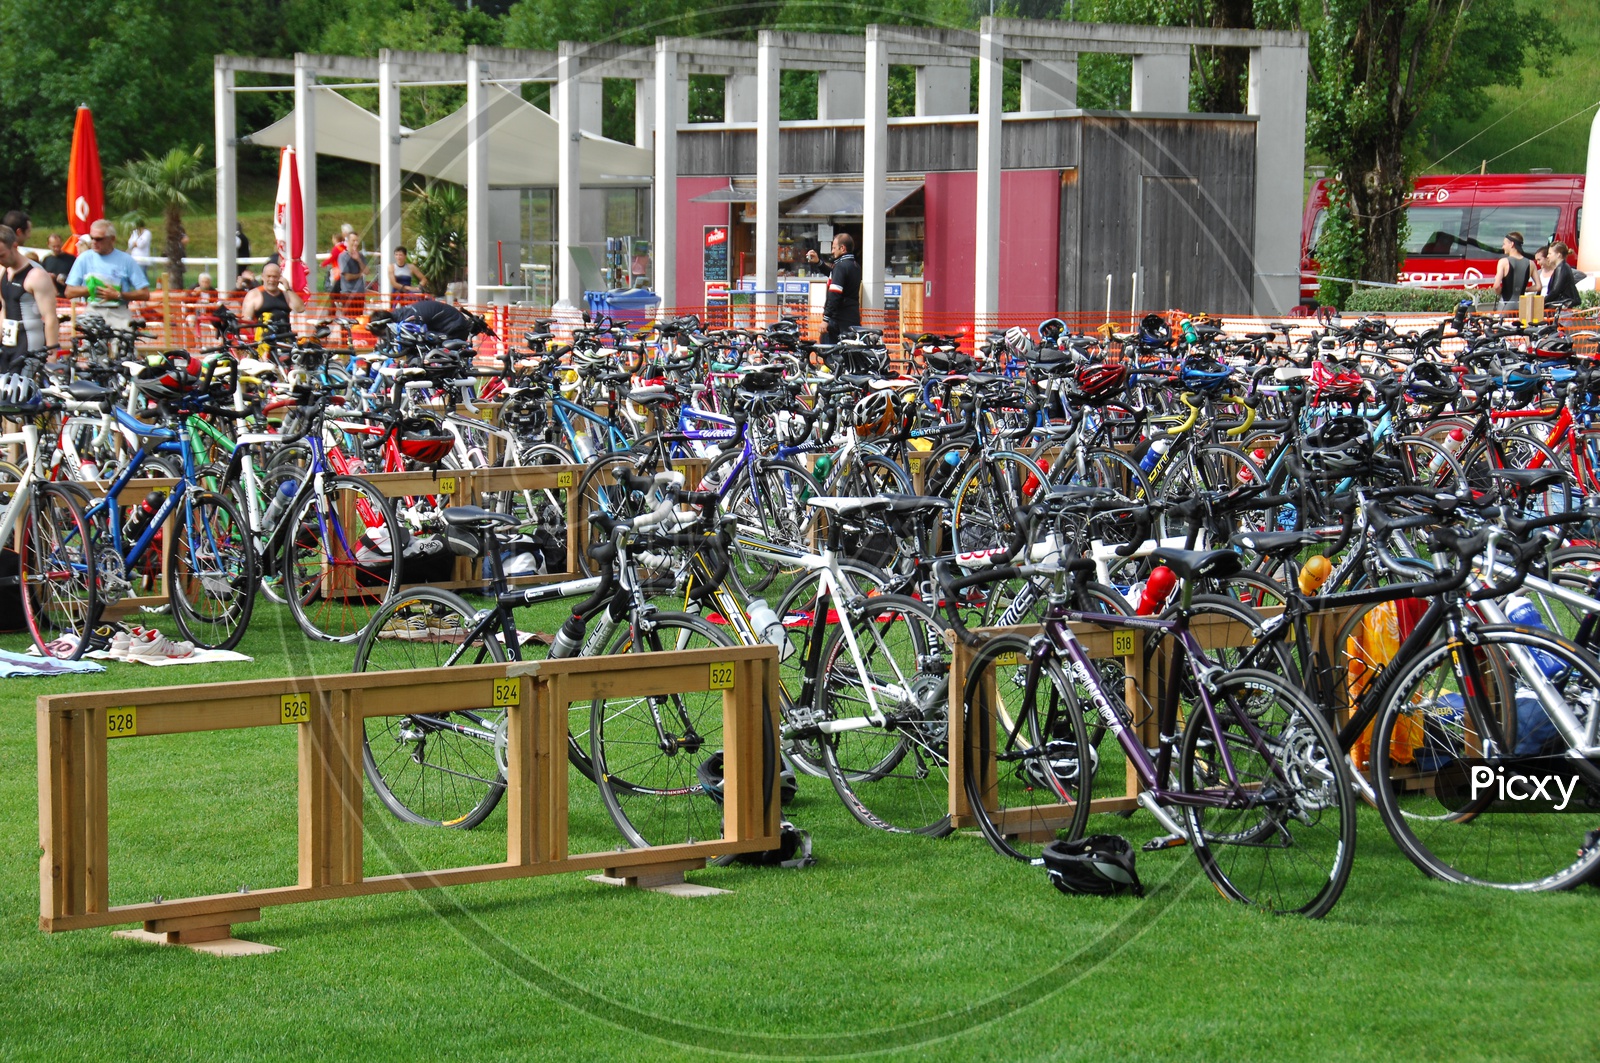 A Group of Cycles Parked In a Parking Area